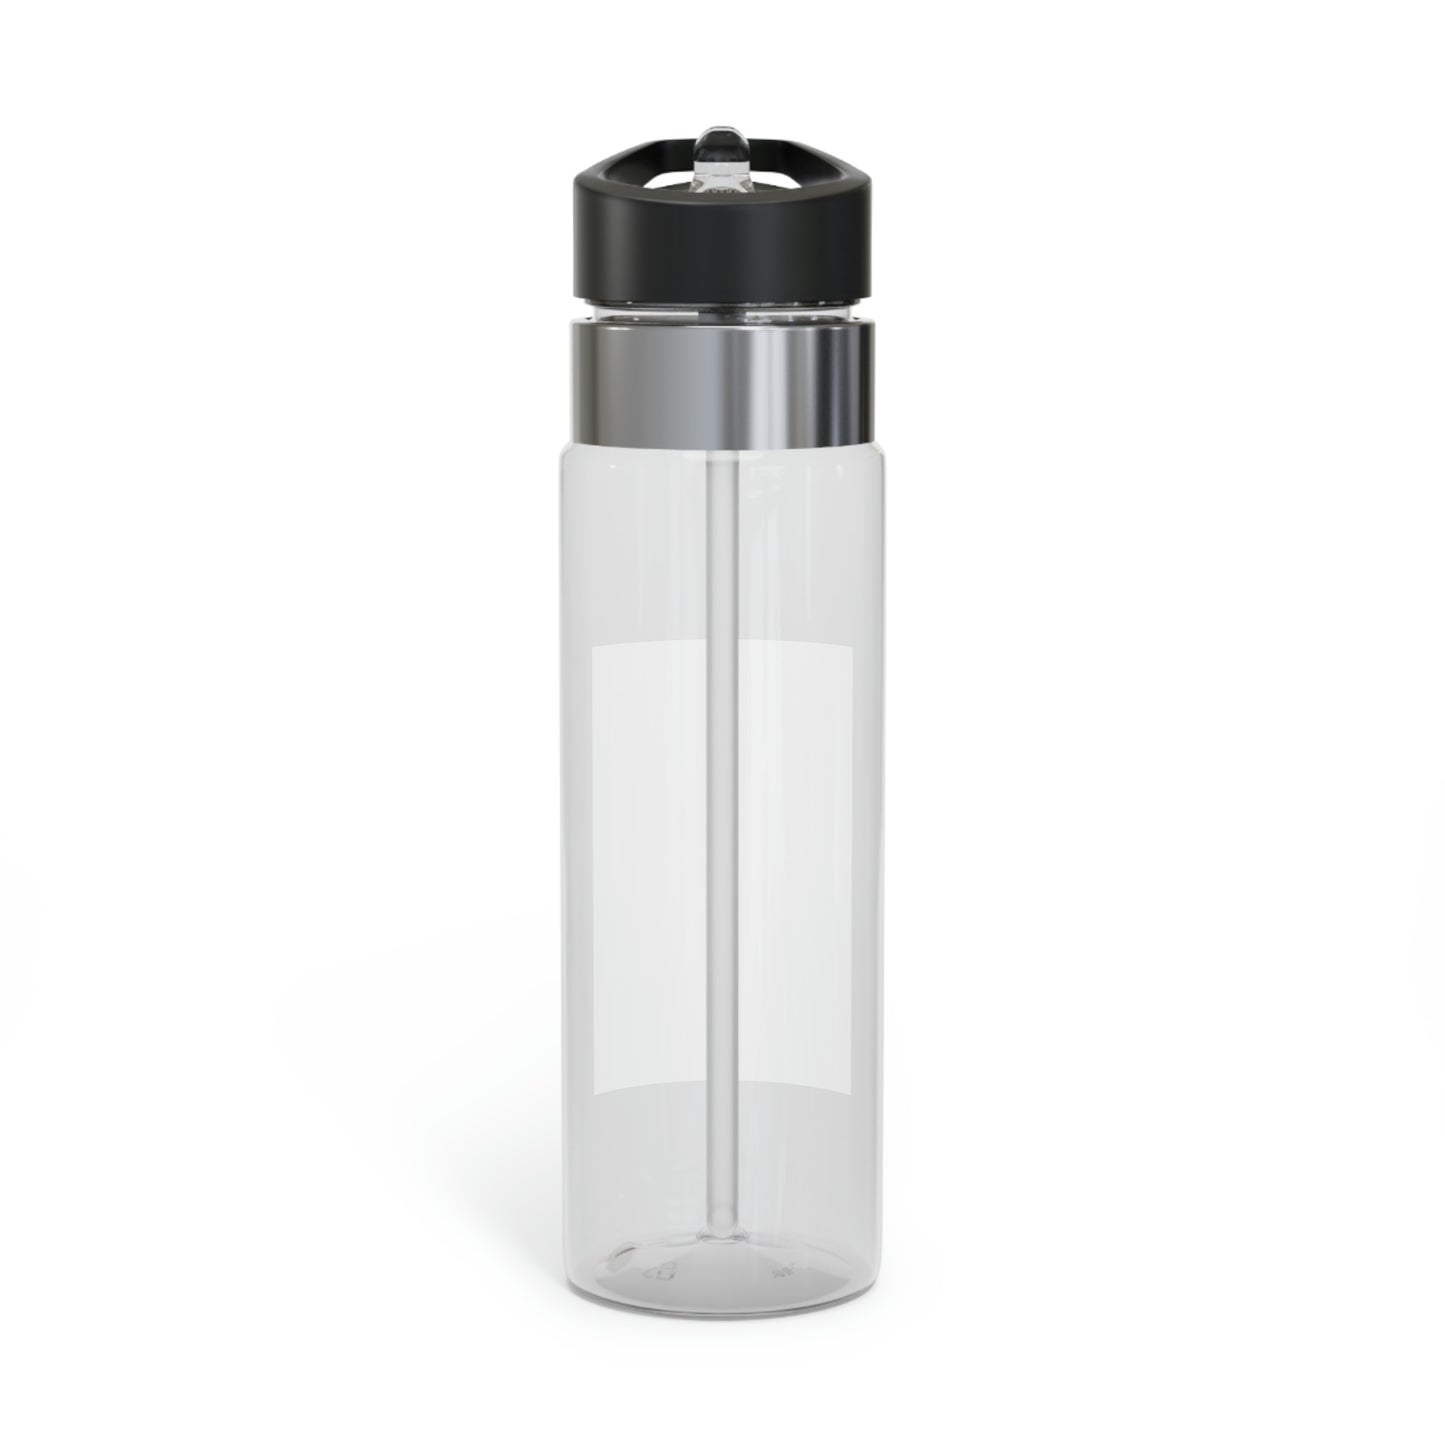 As Far As The I Can See - Kensington Sport Bottle